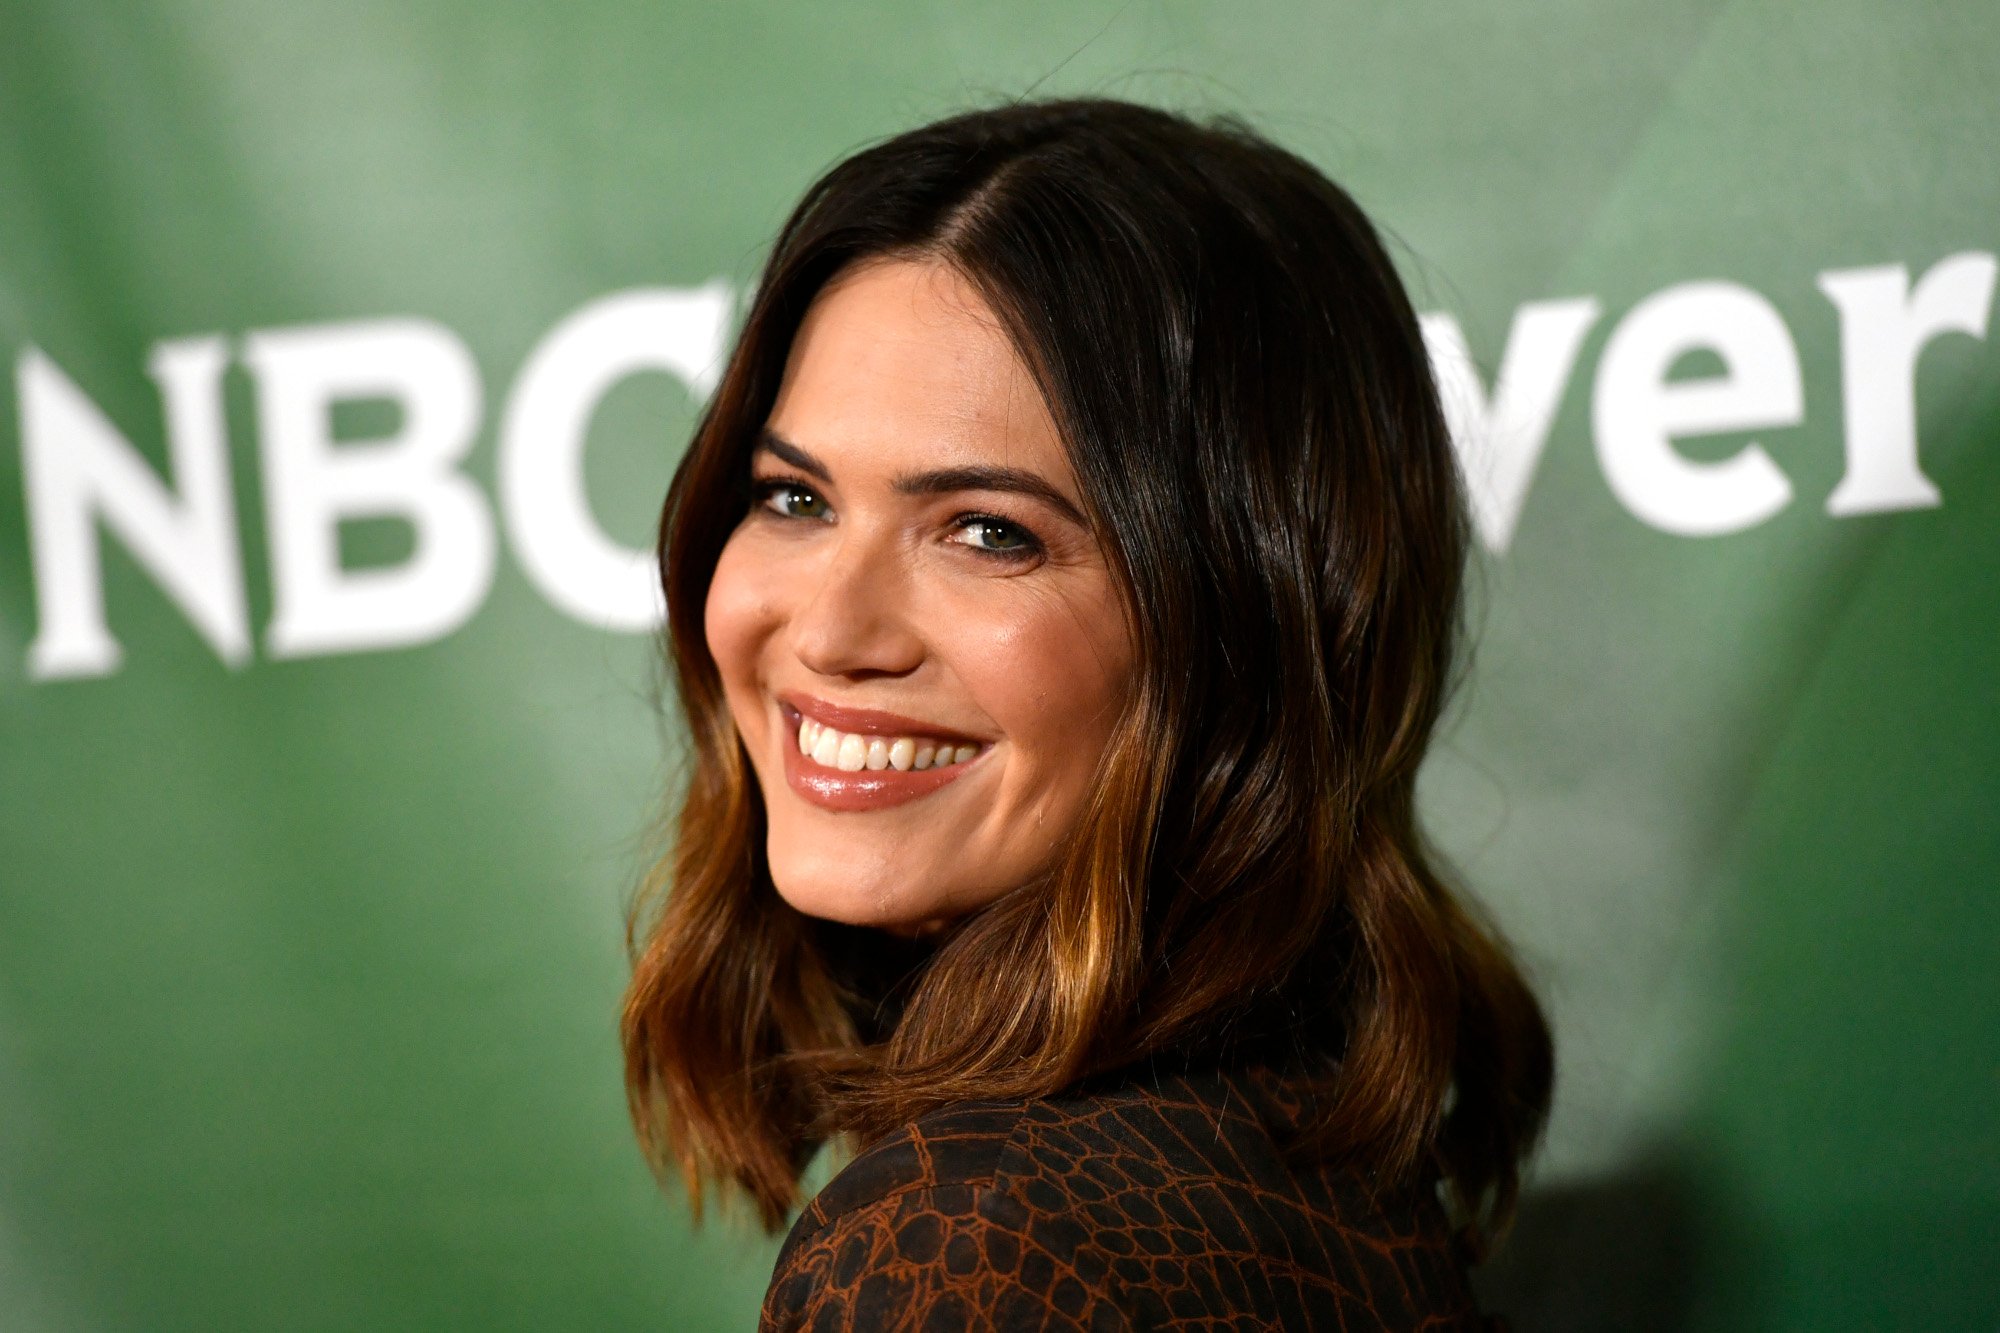 'This Is Us' star Mandy Moore, who commented on the finale scene between Rebecca and Jack. She's standing in front of a green wall with 'NBCUniversal' written on it, and she's wearing a brown sweater.